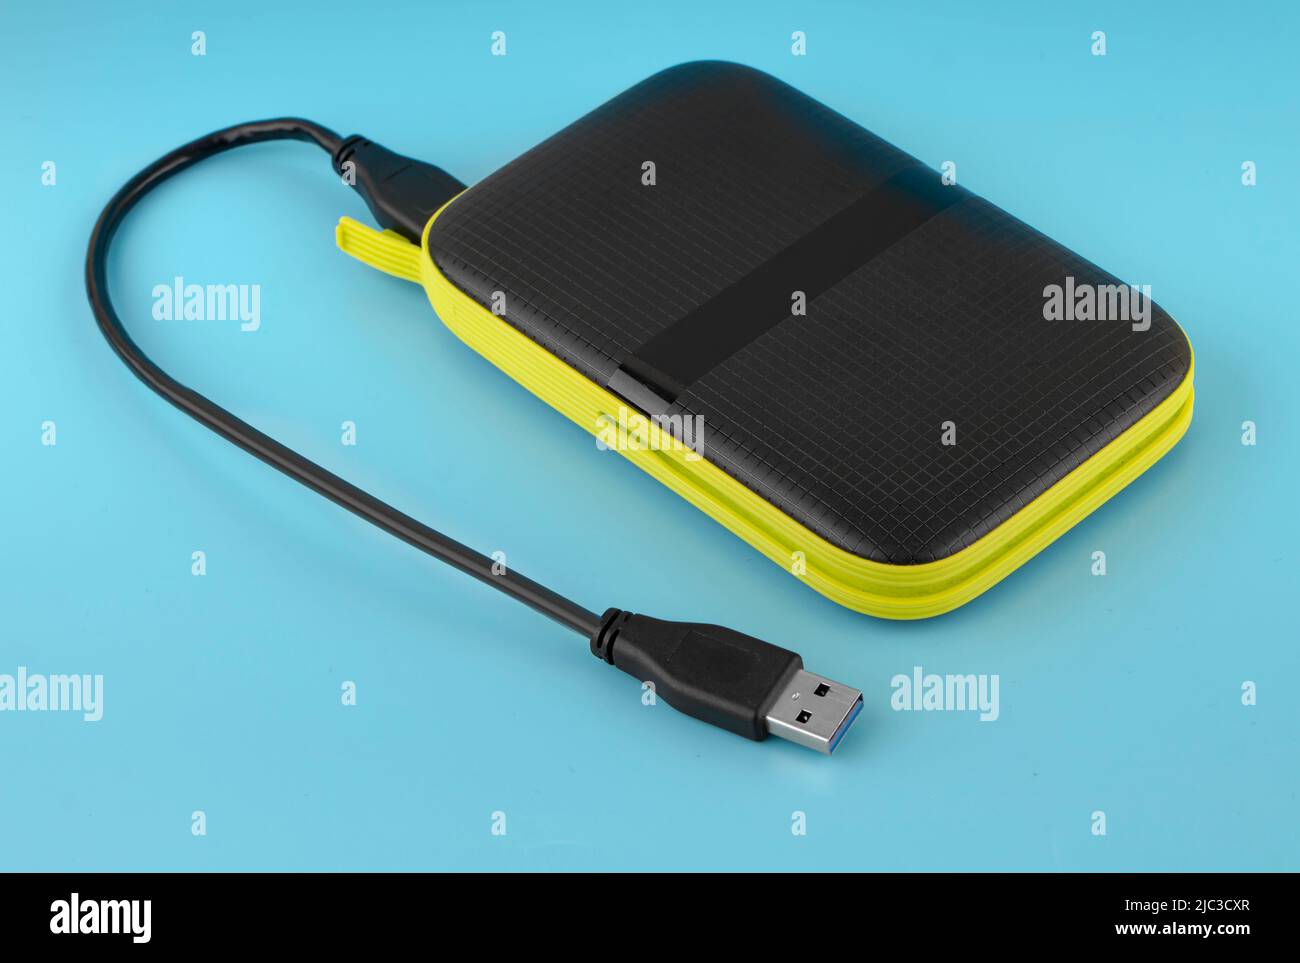 external hard drive, external drive with USB cable on a blue background Stock Photo